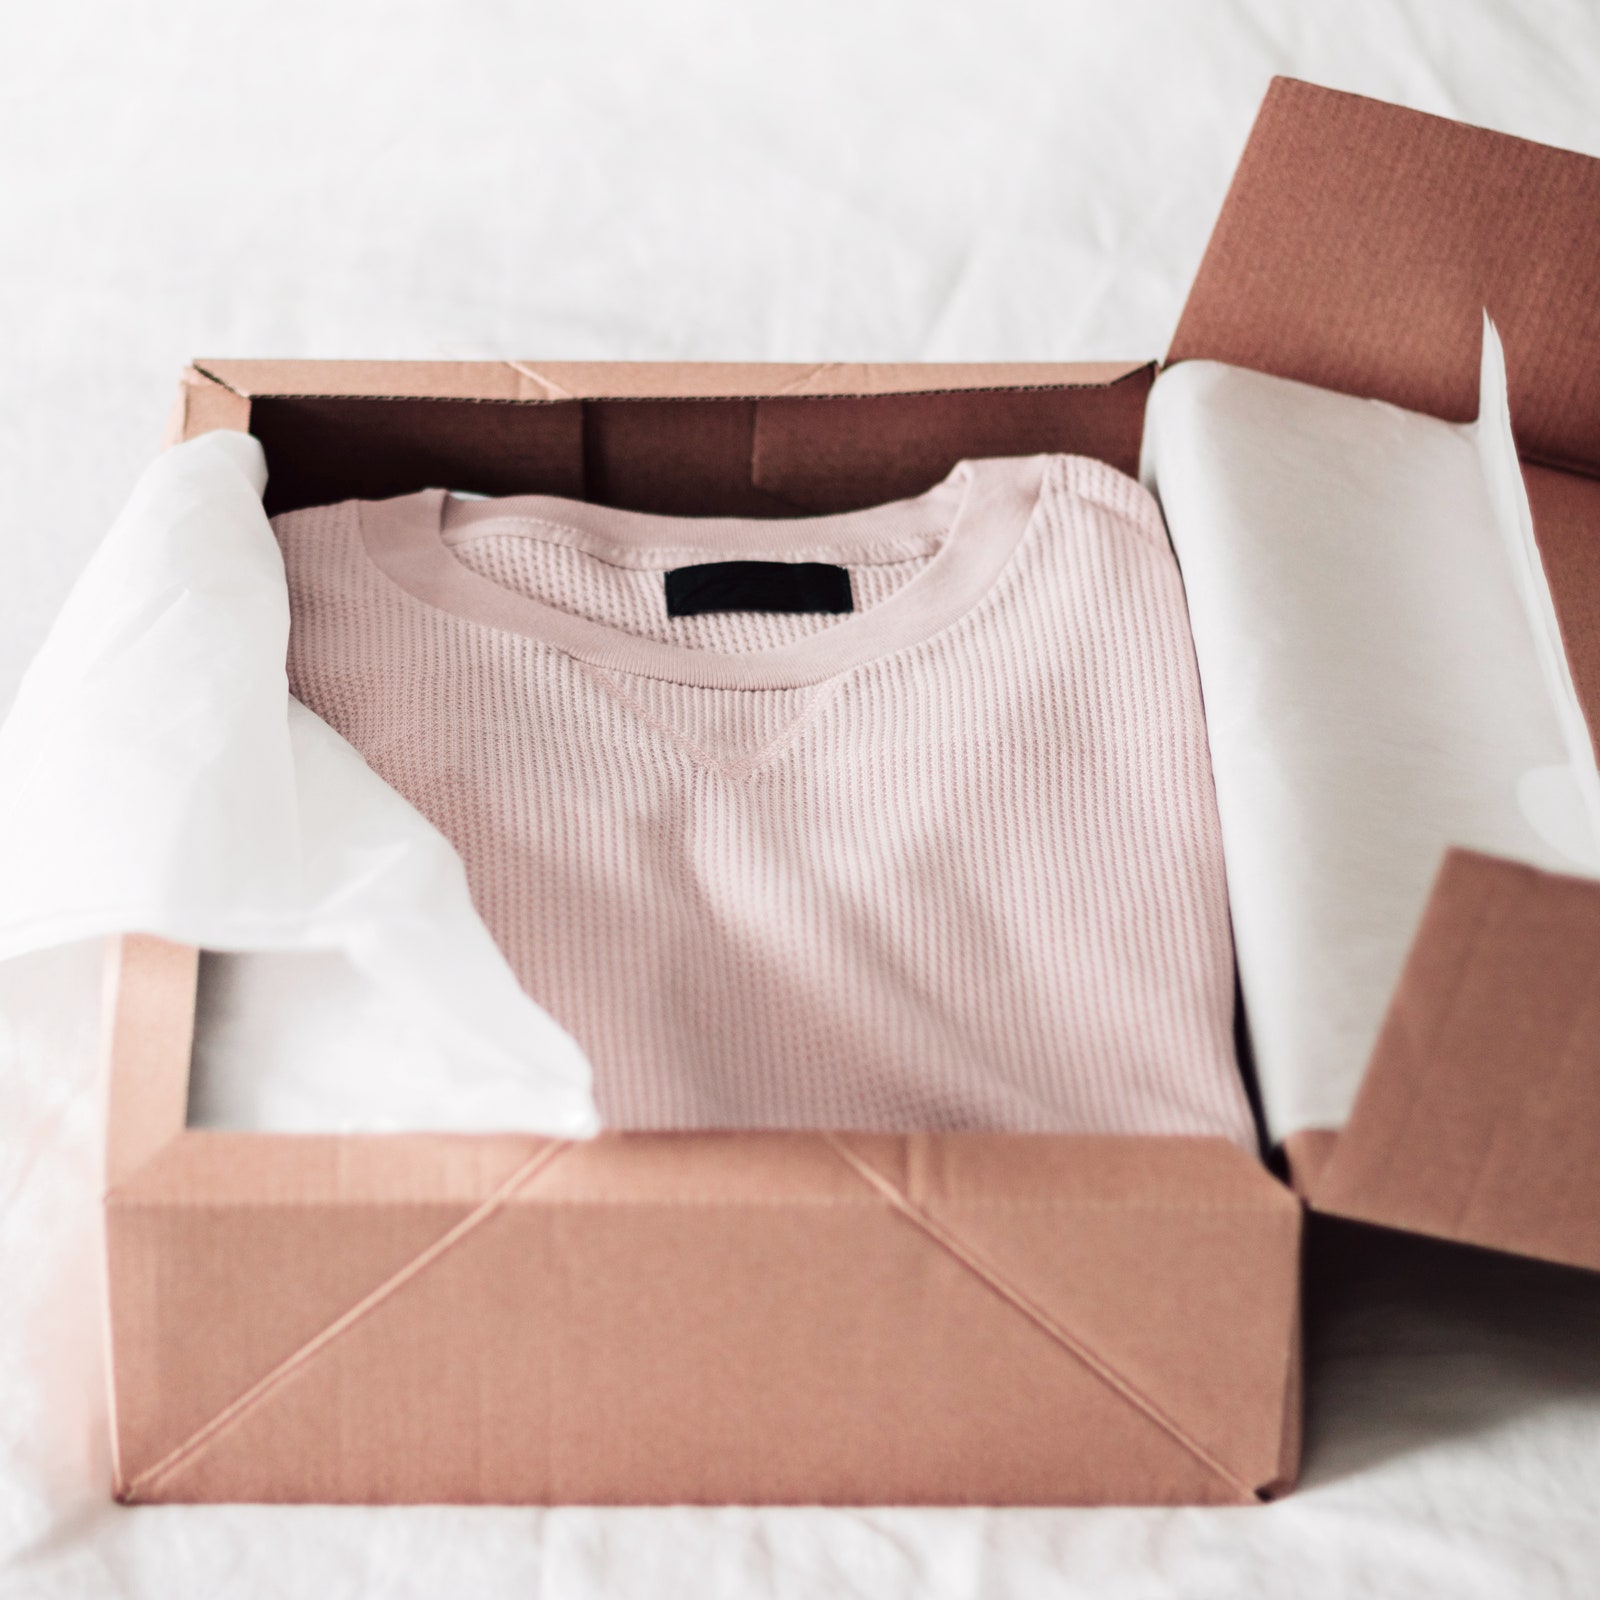 These Clothing Subscription Boxes Make Getting Ready So Much Easier